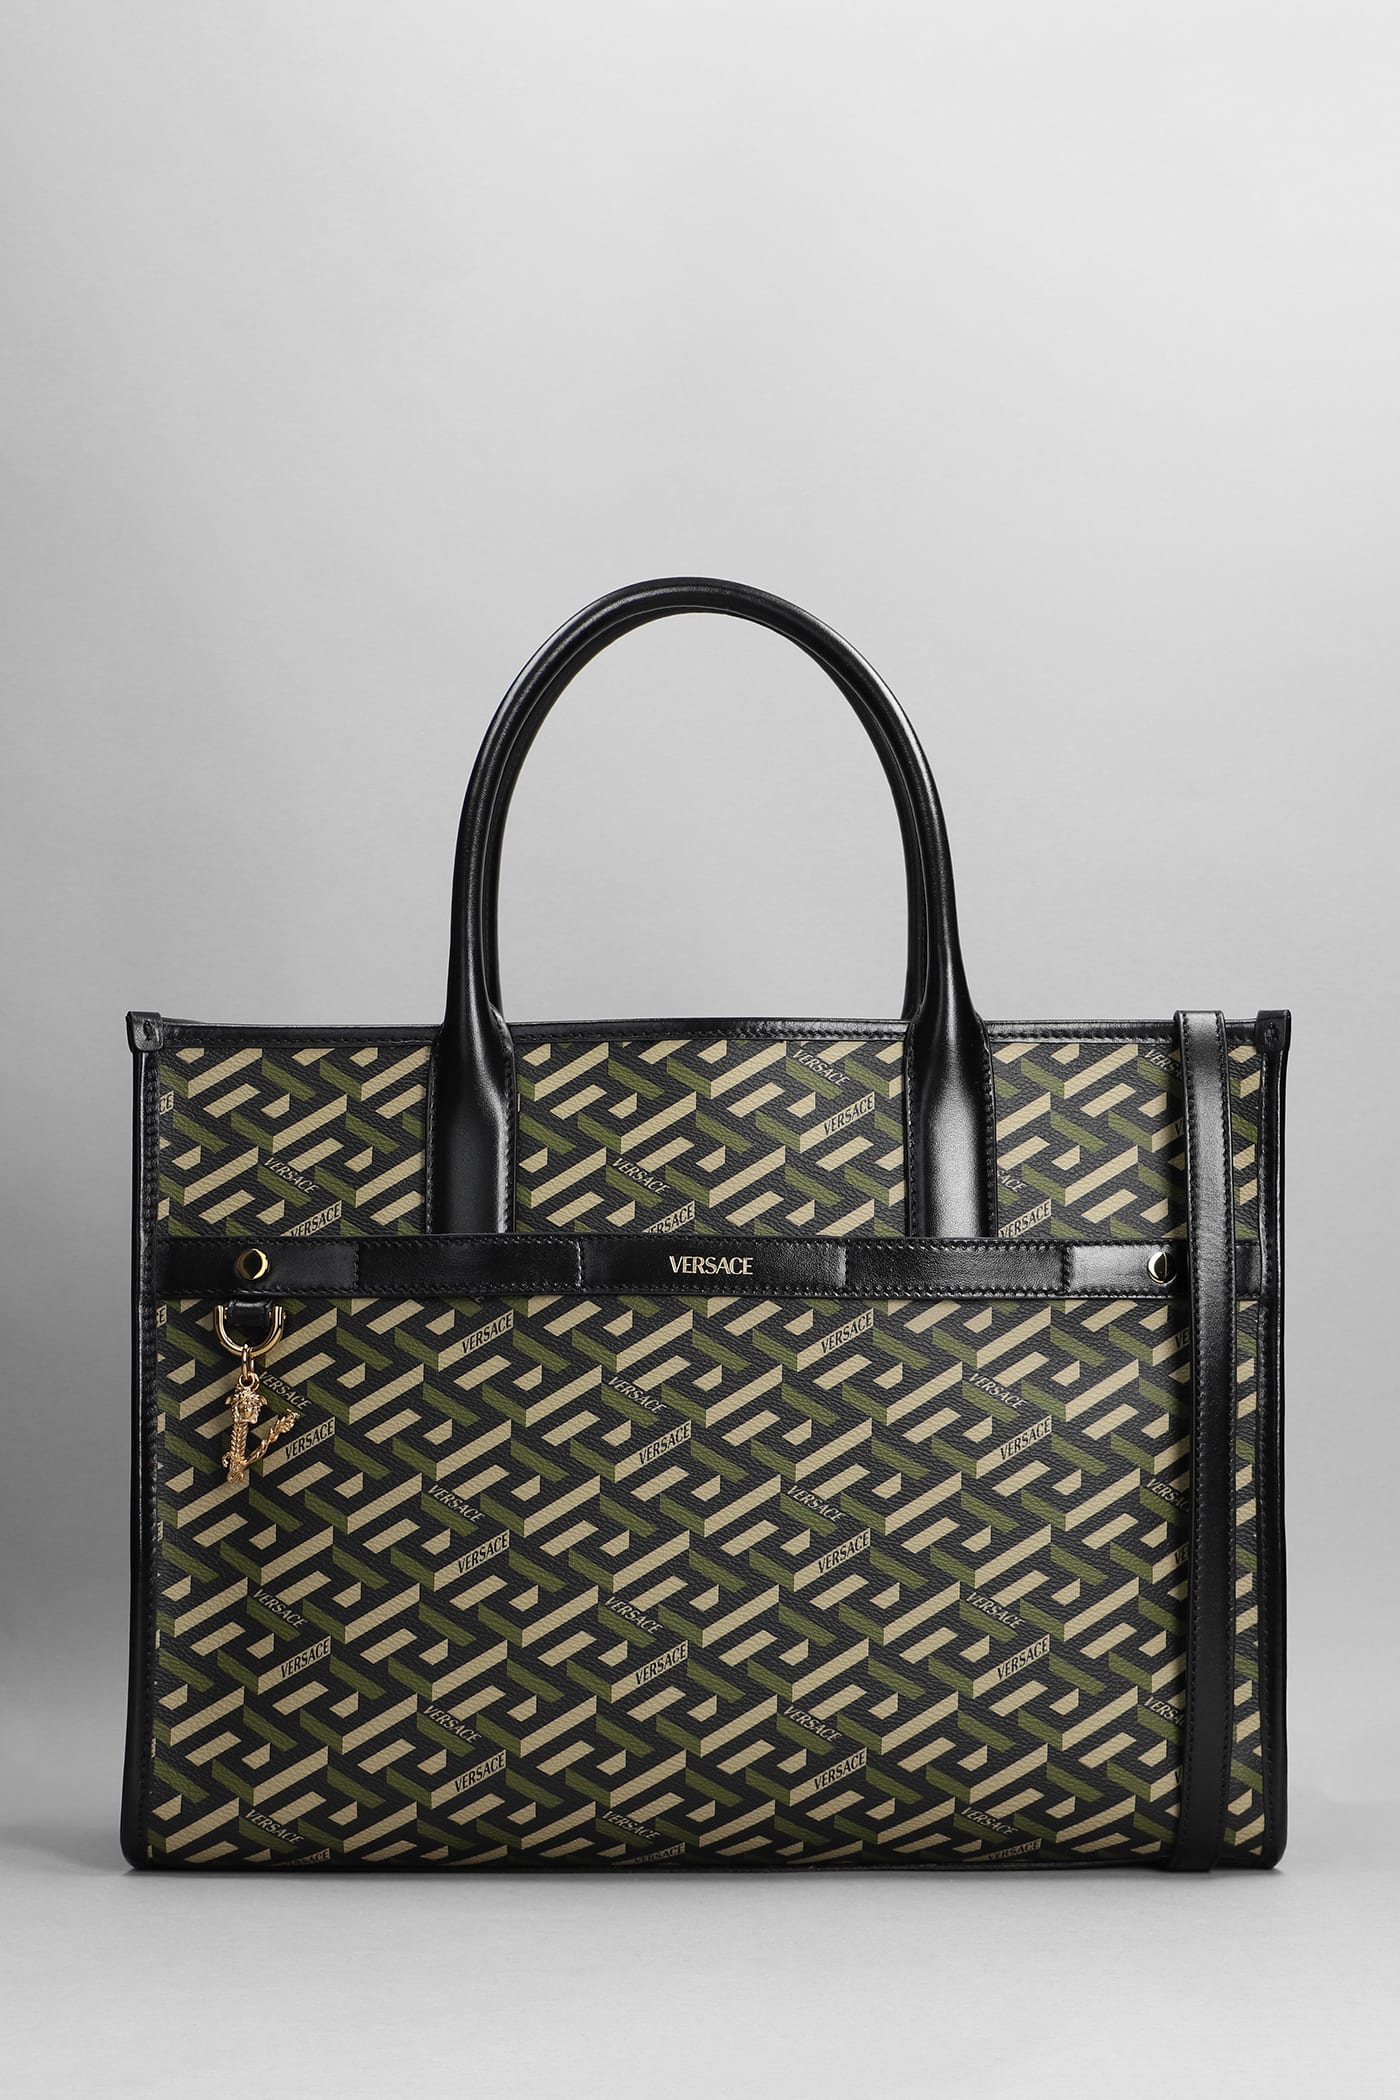 Versace Tote In Black Leather